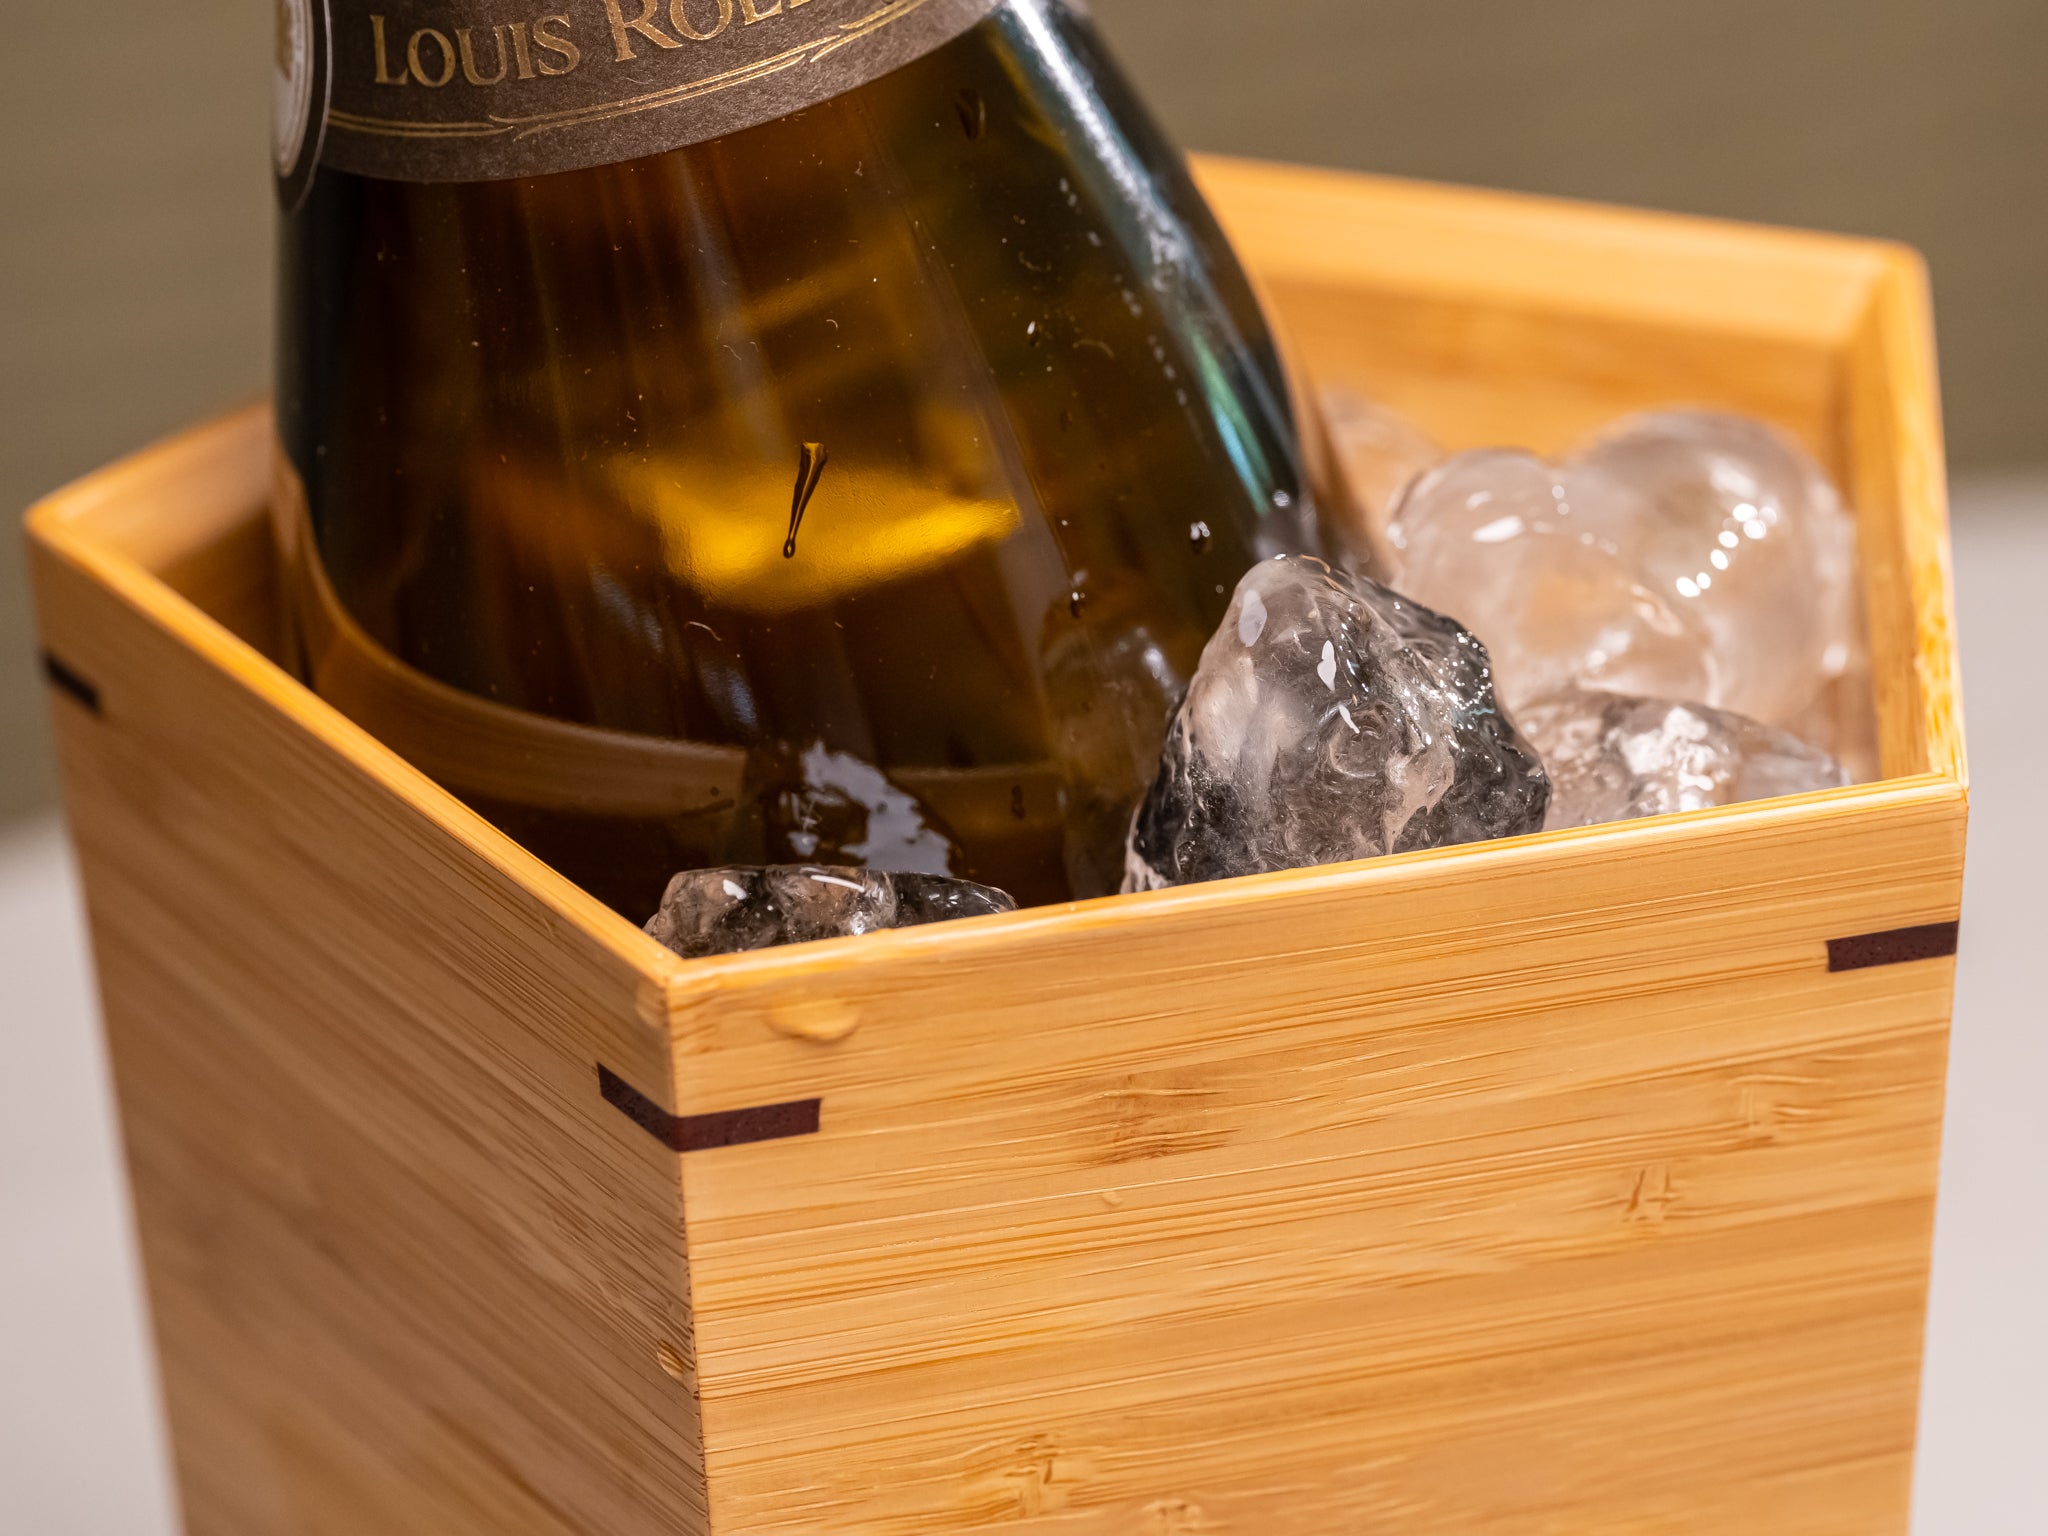 Japanese bamboo wine cooler filled with ice and a bottle of champagne